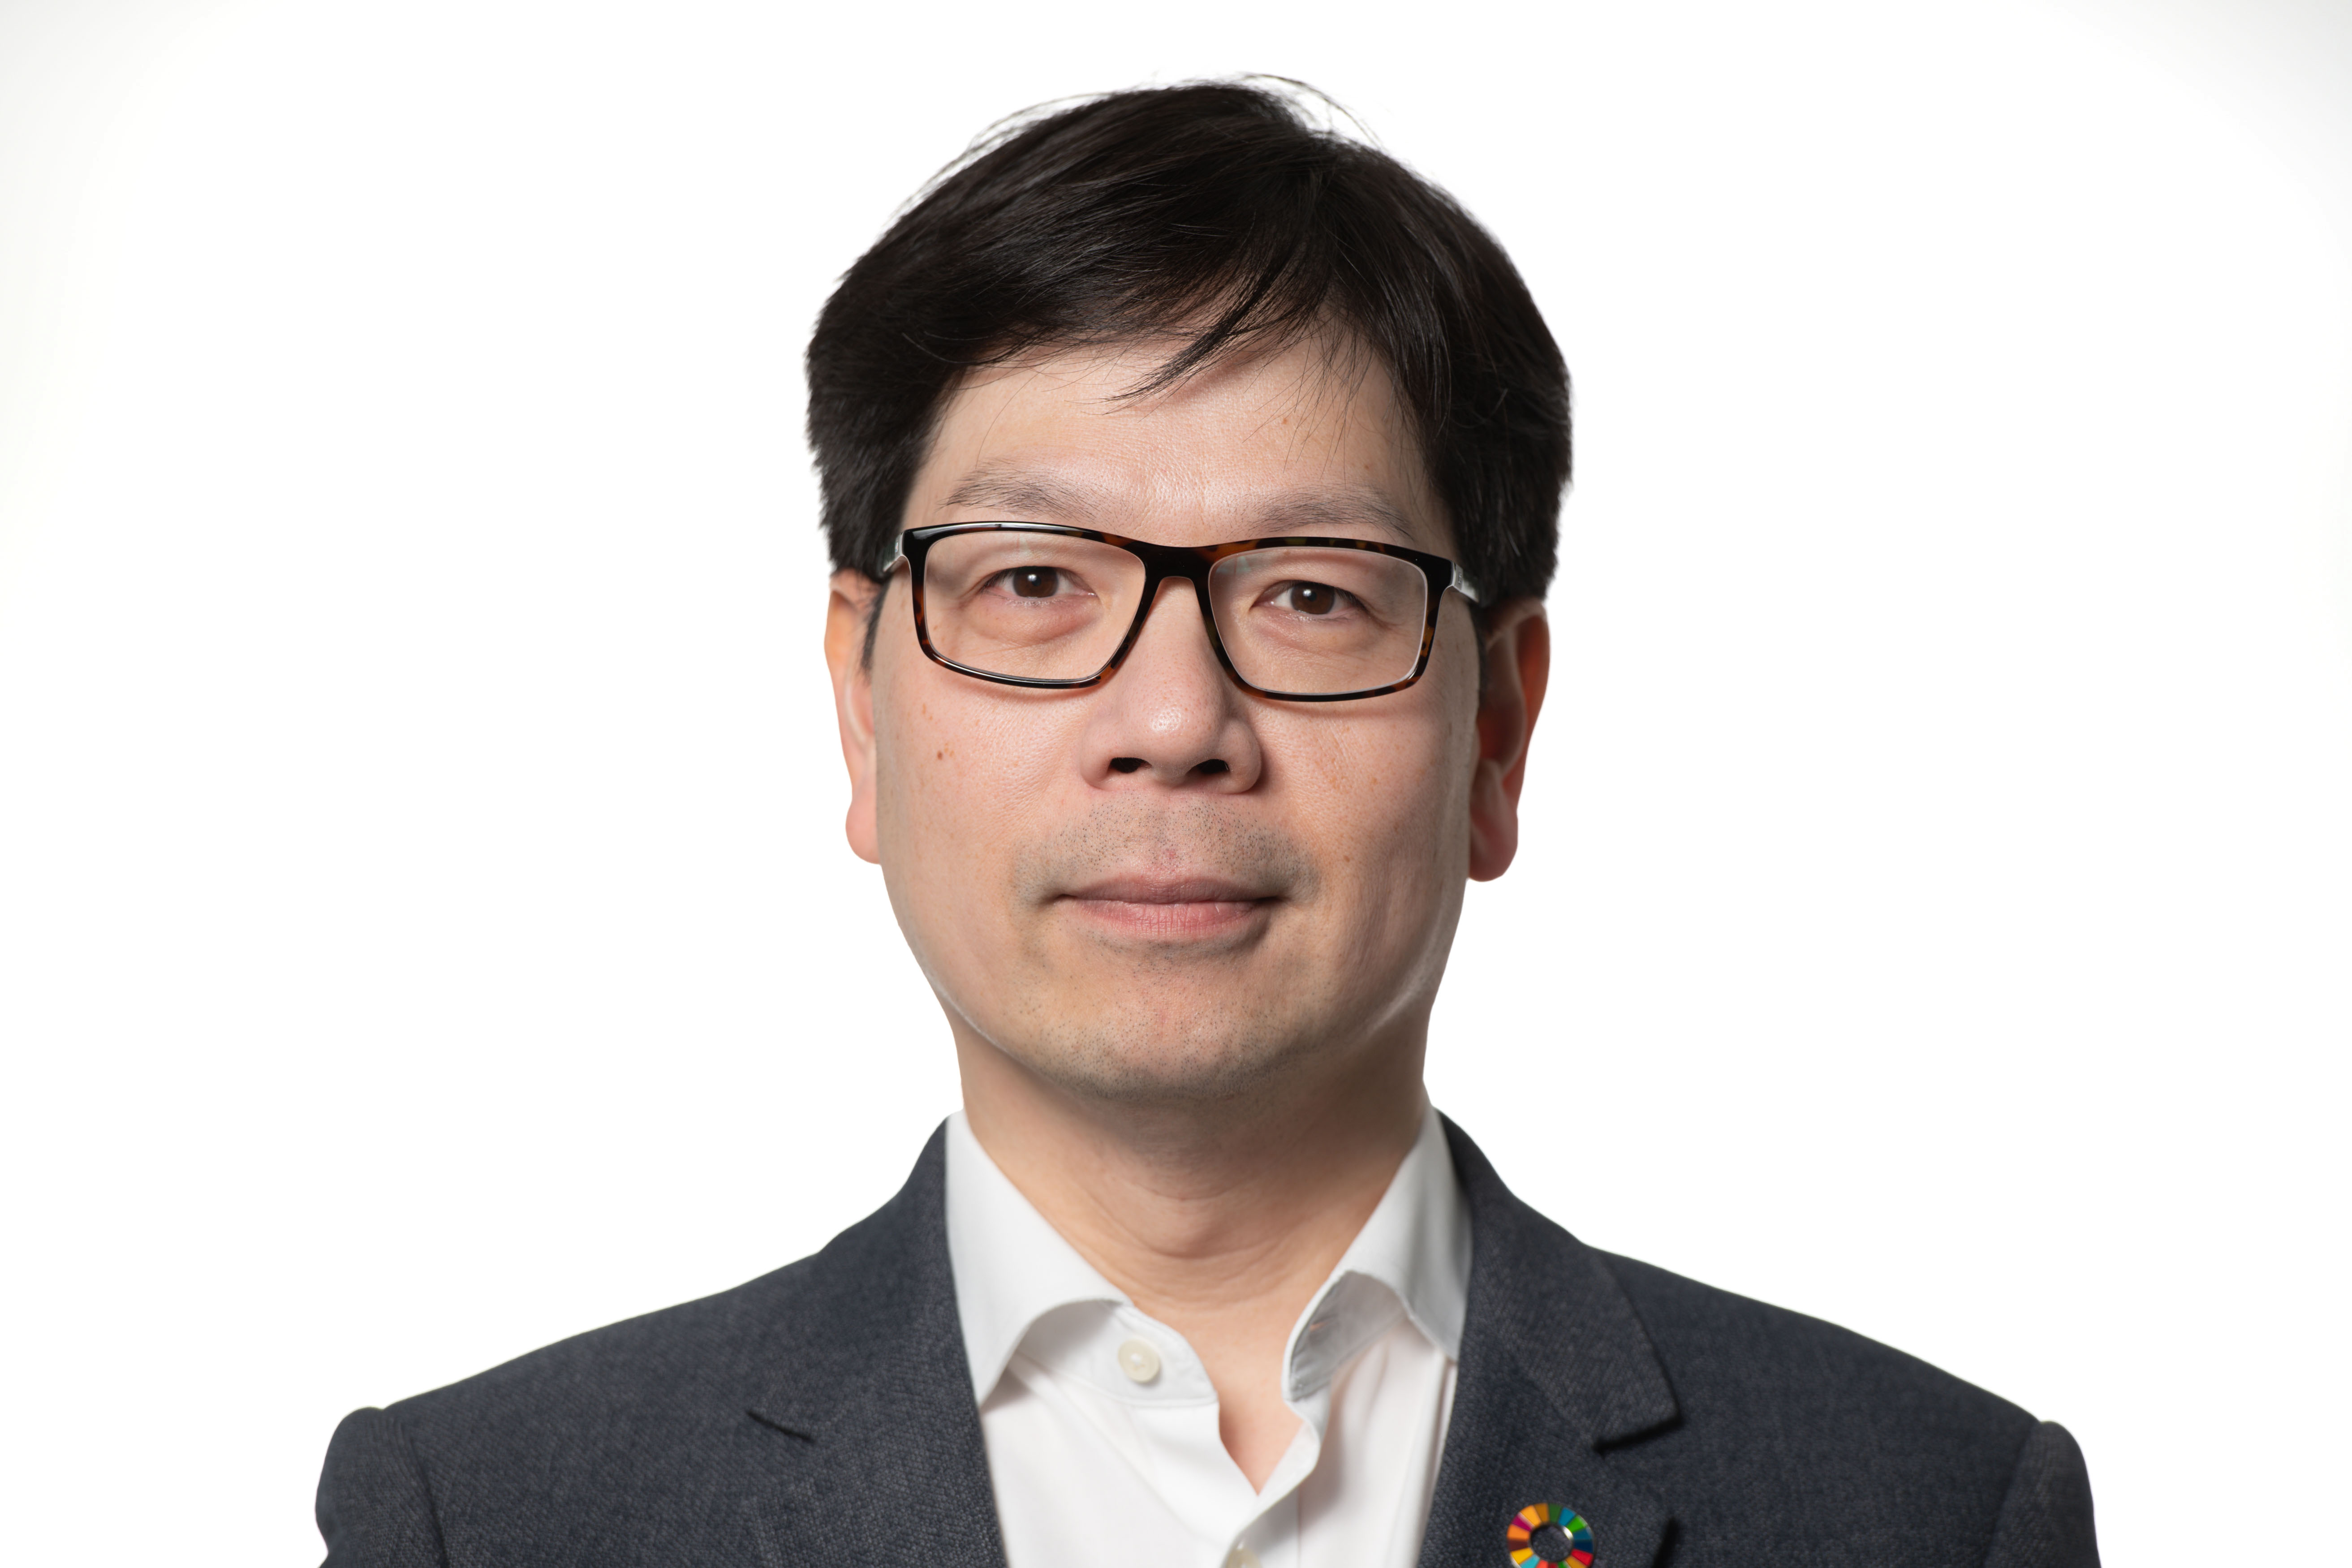 A profile picture of Michael Tong, a Senior Lecturer and Head of Department, in the Department of Construction and Surveying at GCU.